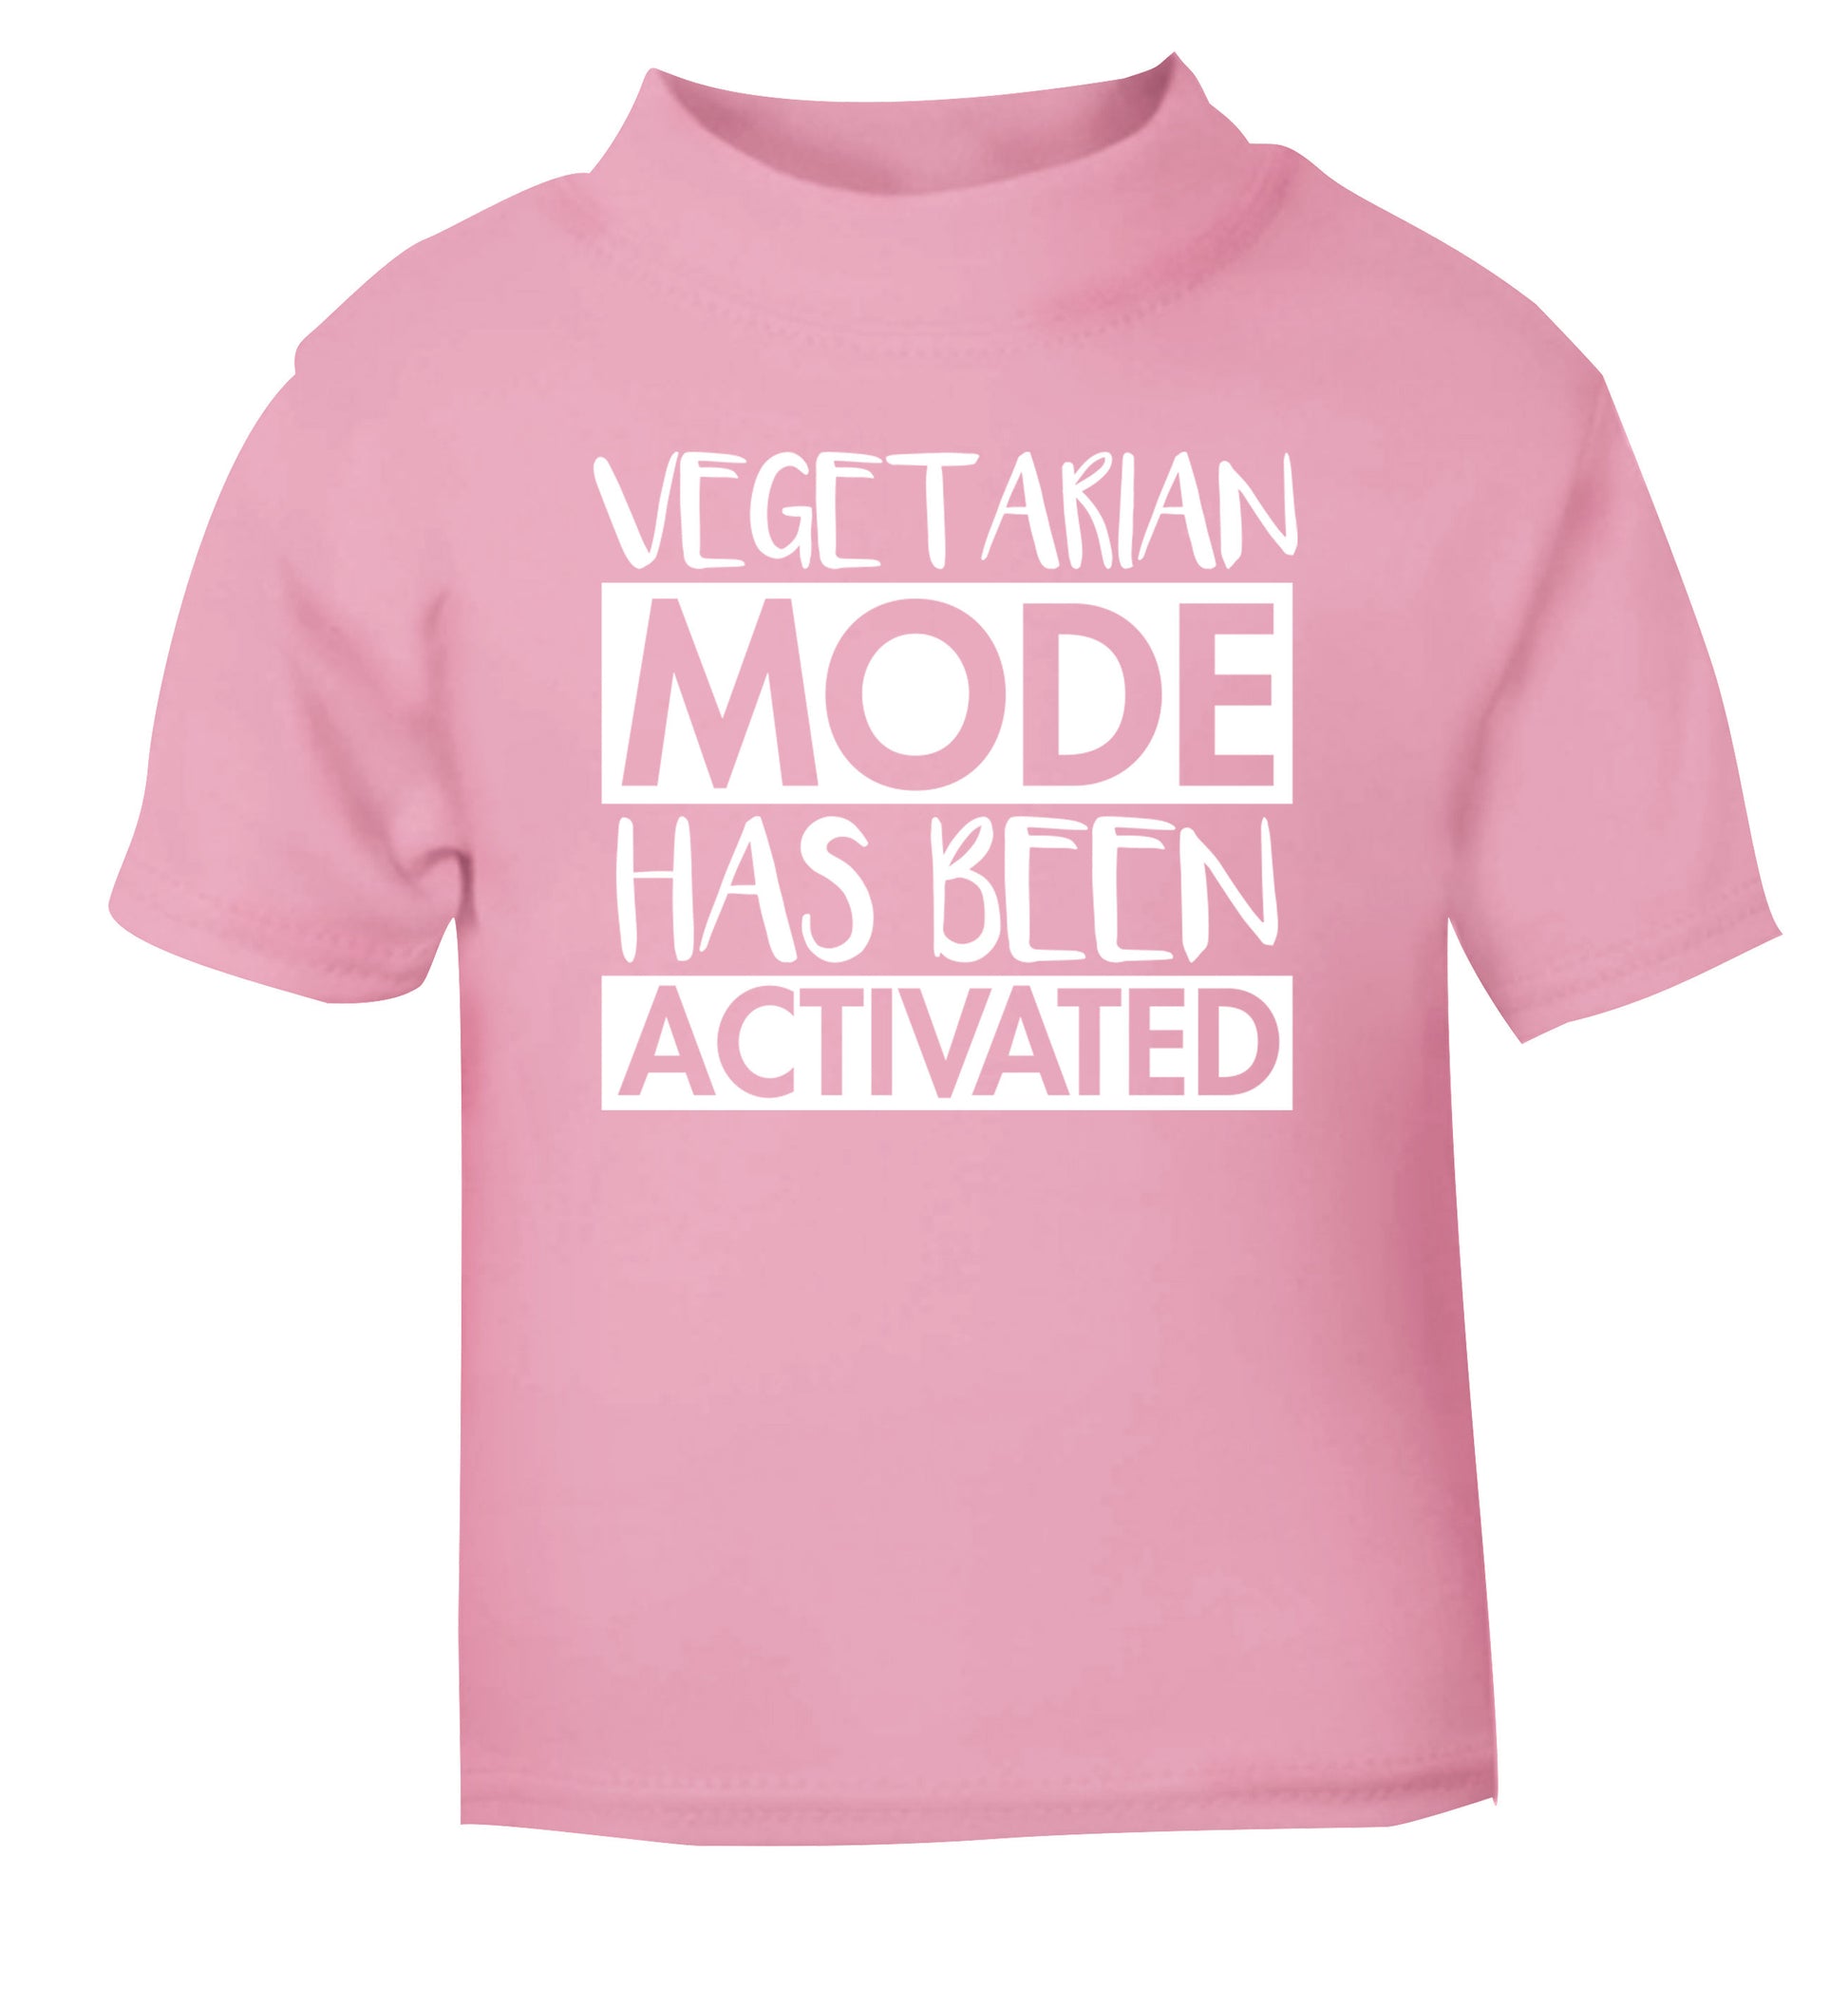 Vegetarian mode activated light pink Baby Toddler Tshirt 2 Years